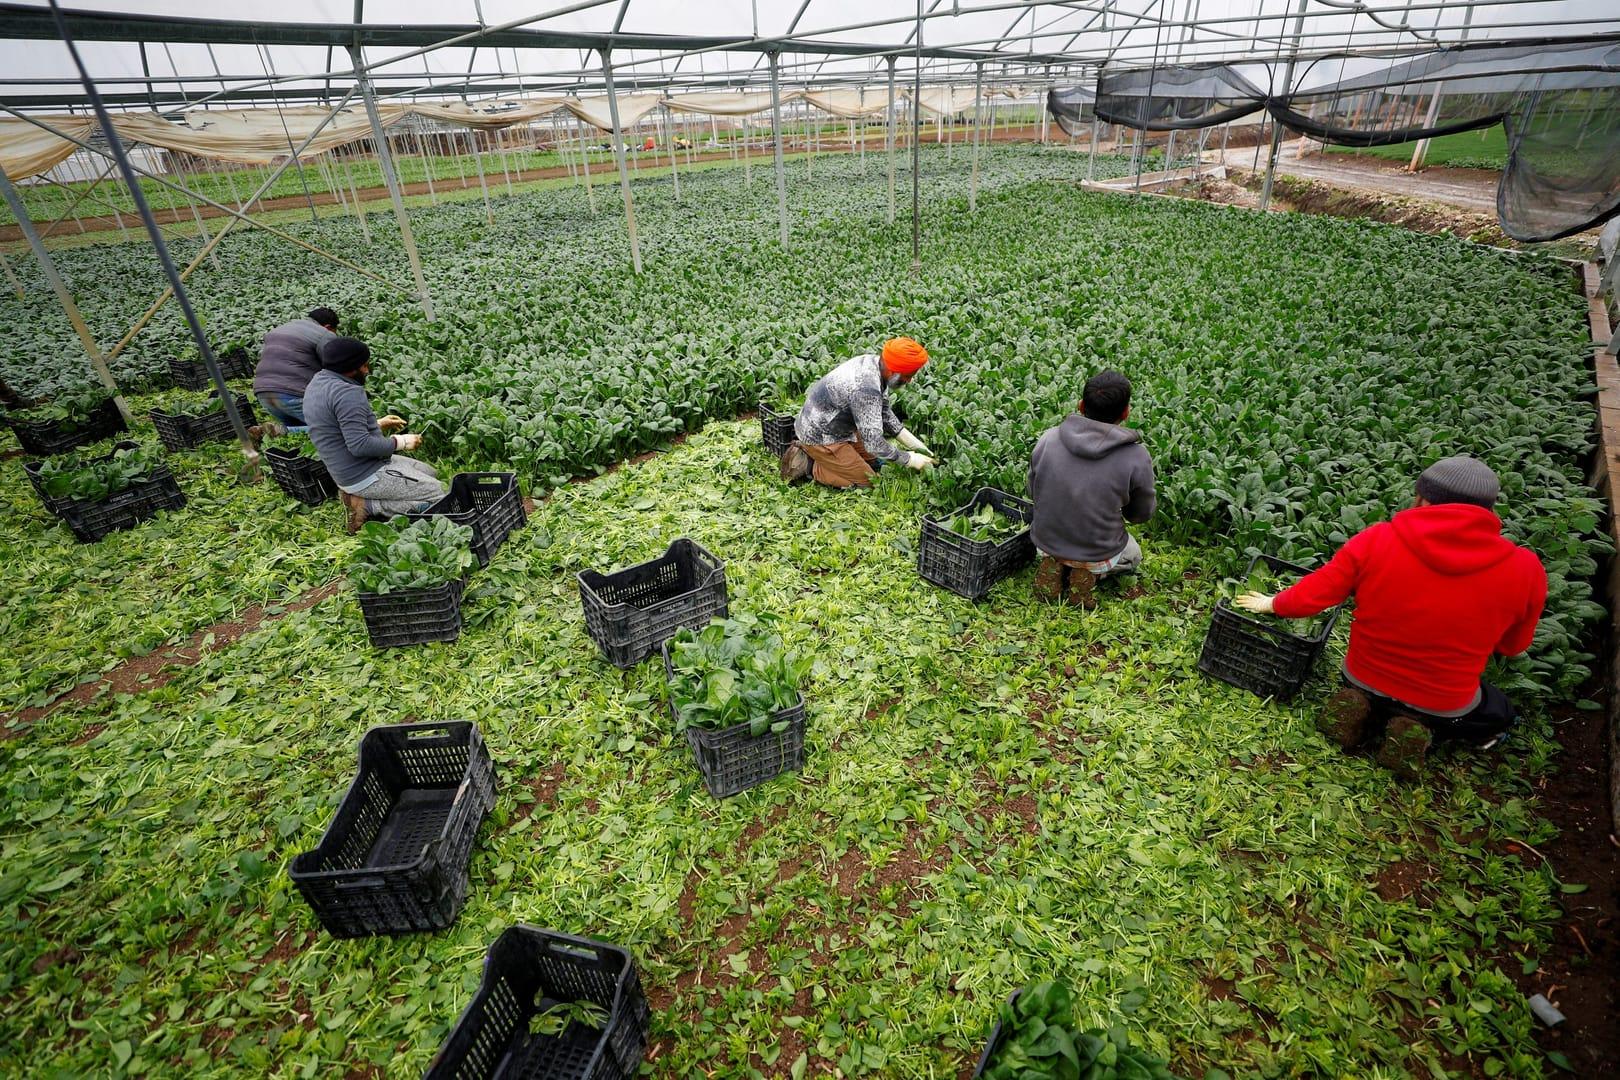 Italy grants temporary residency to migrant farmworkers